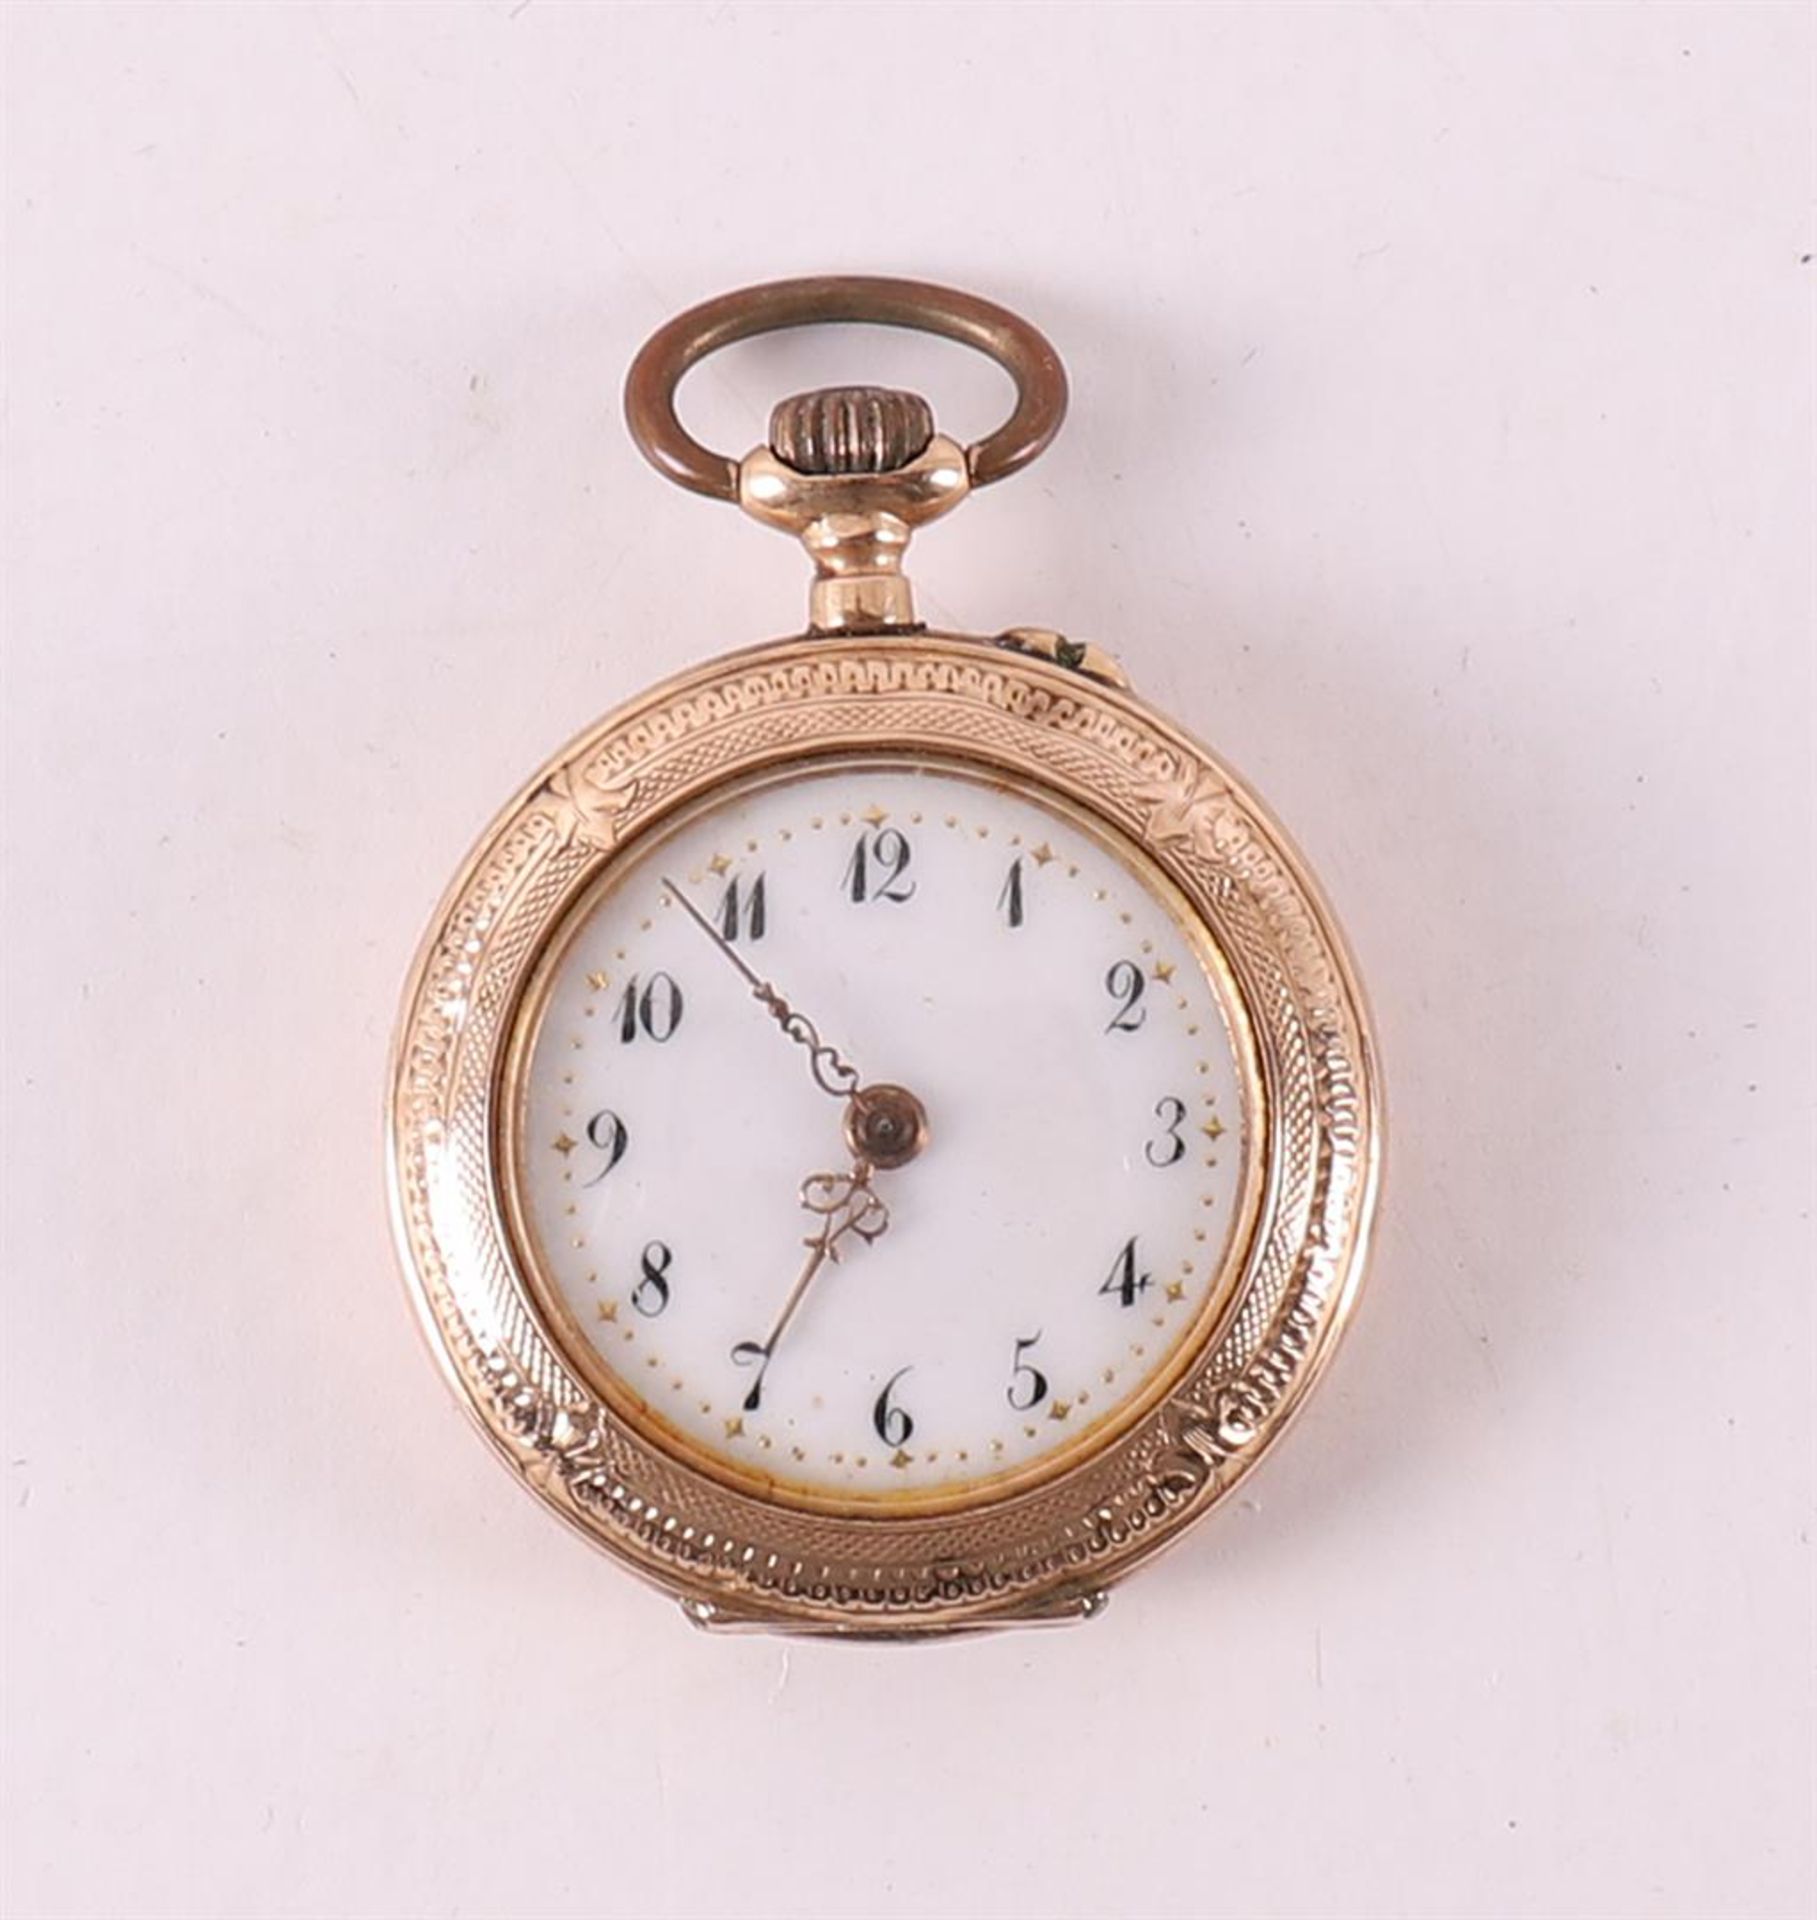 A ladies' pendant watch in 14 kt 585/1000 yellow gold case, circa 1900.